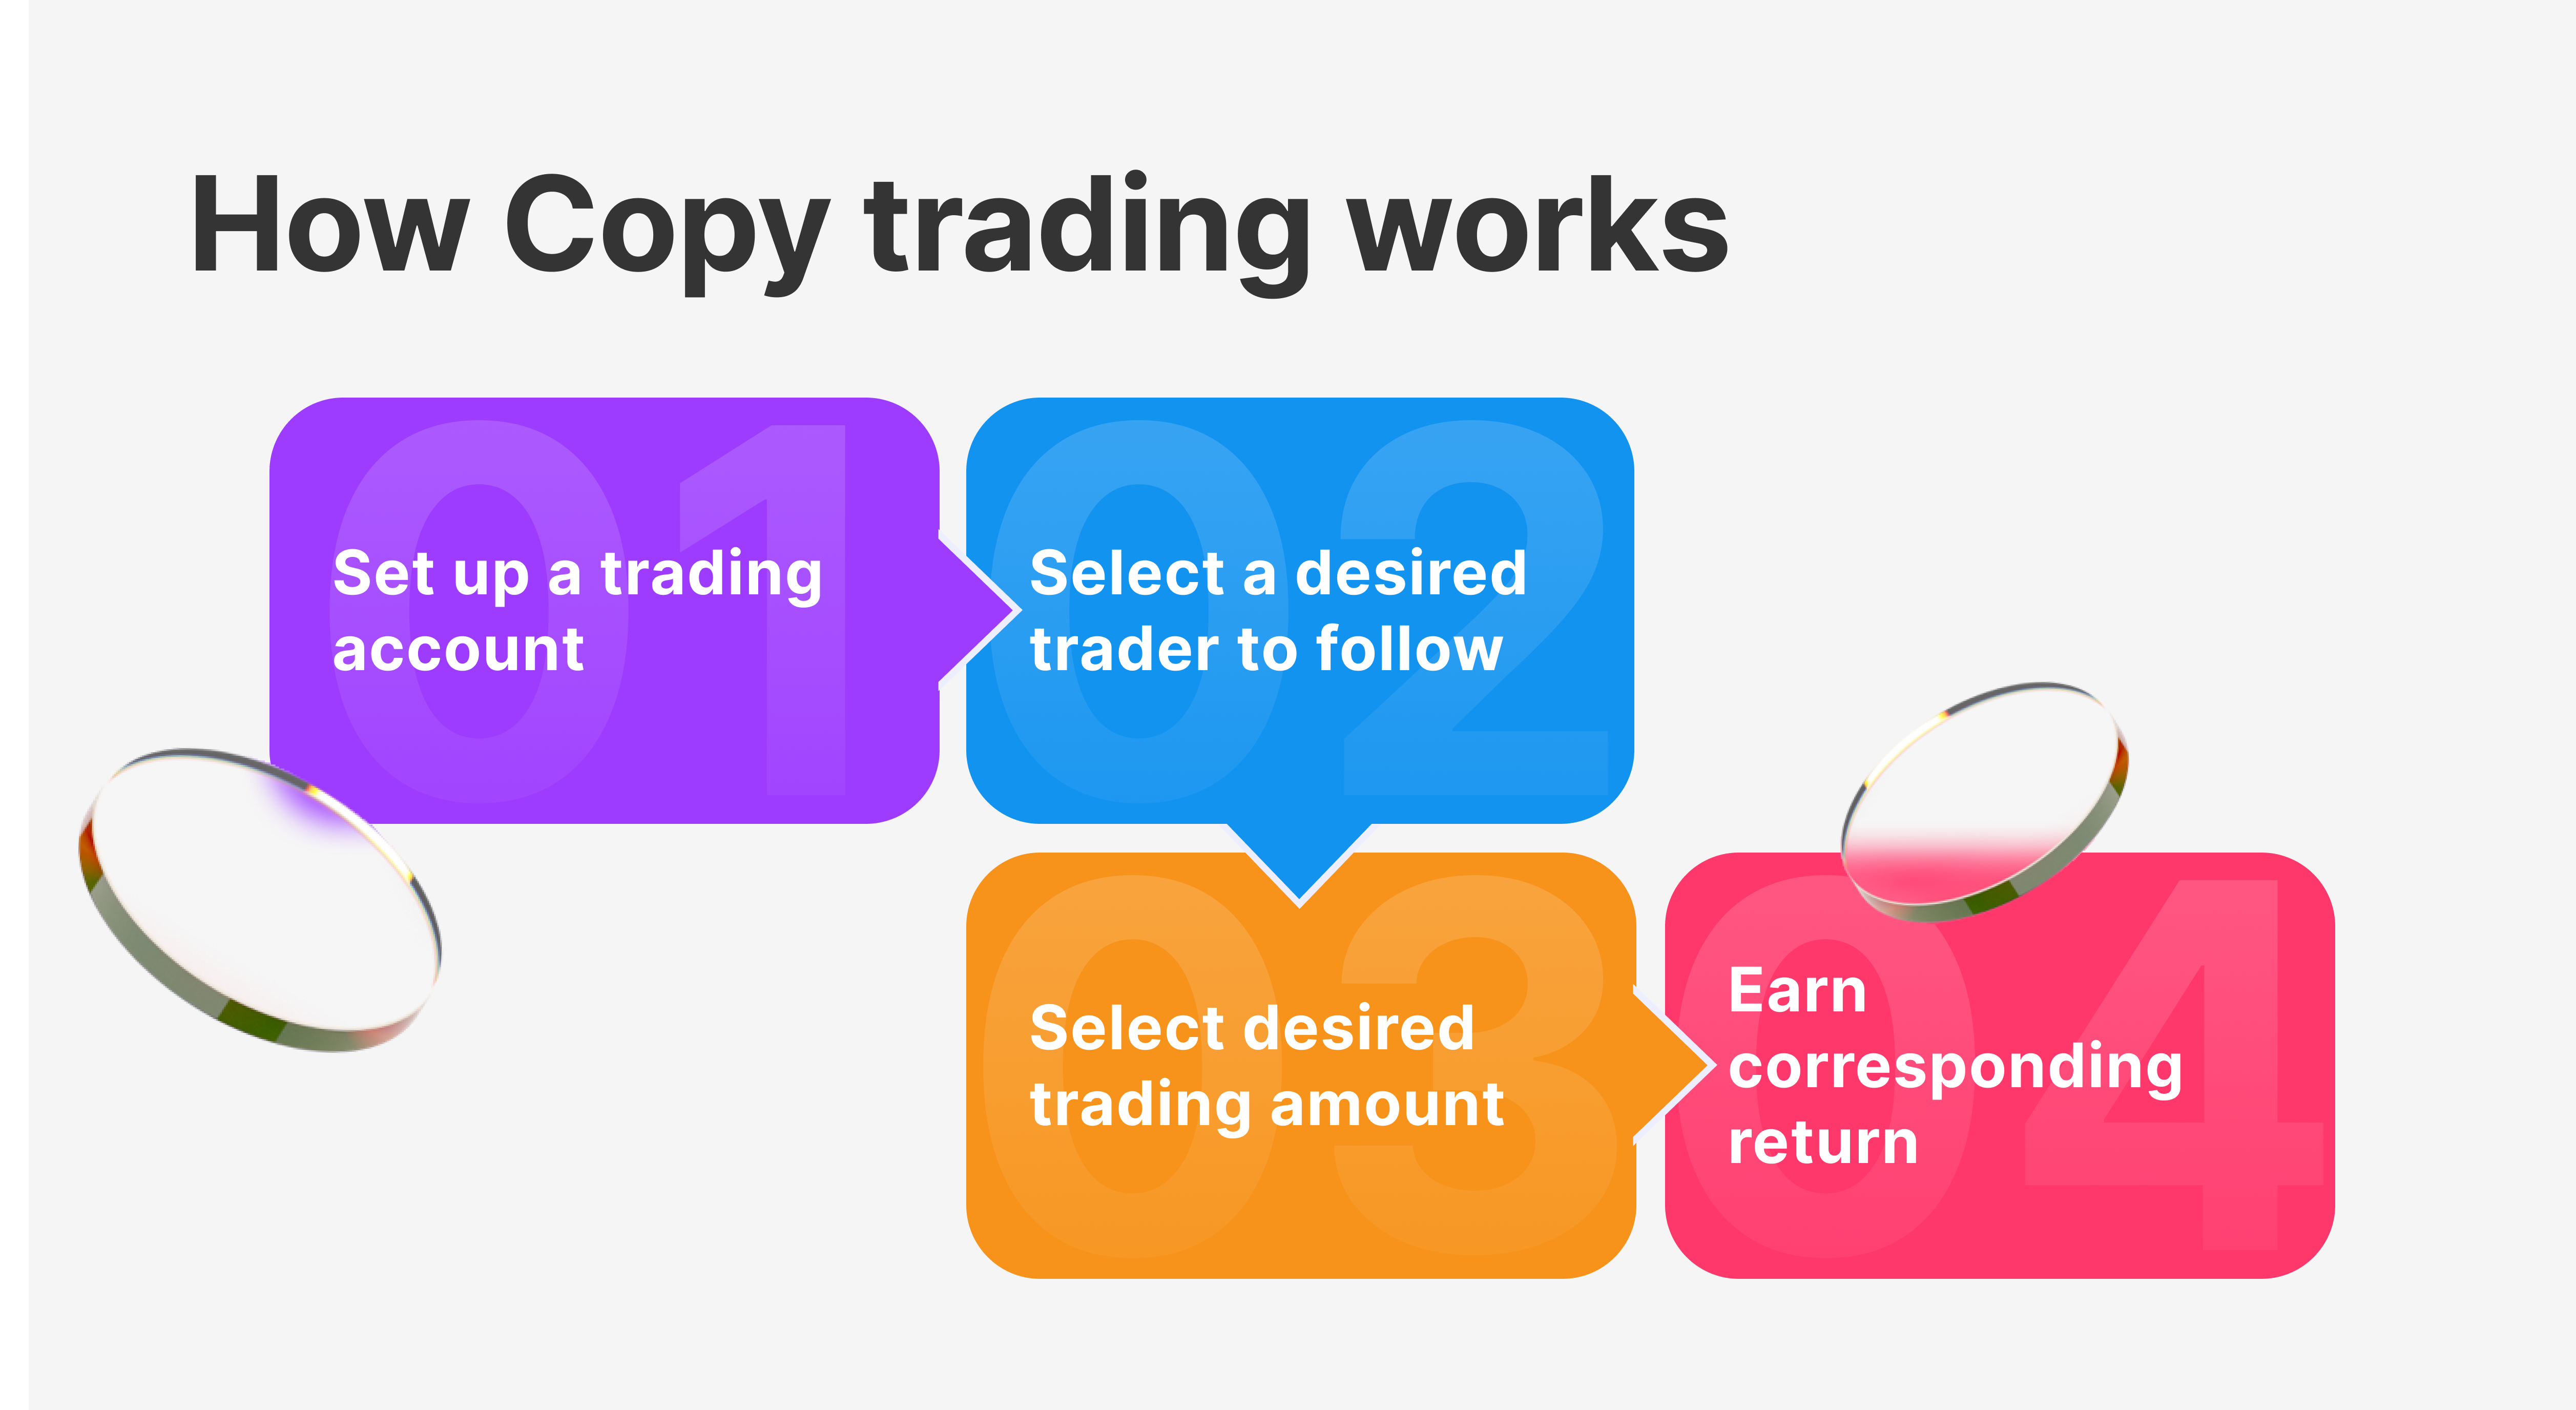 How Copy trading works